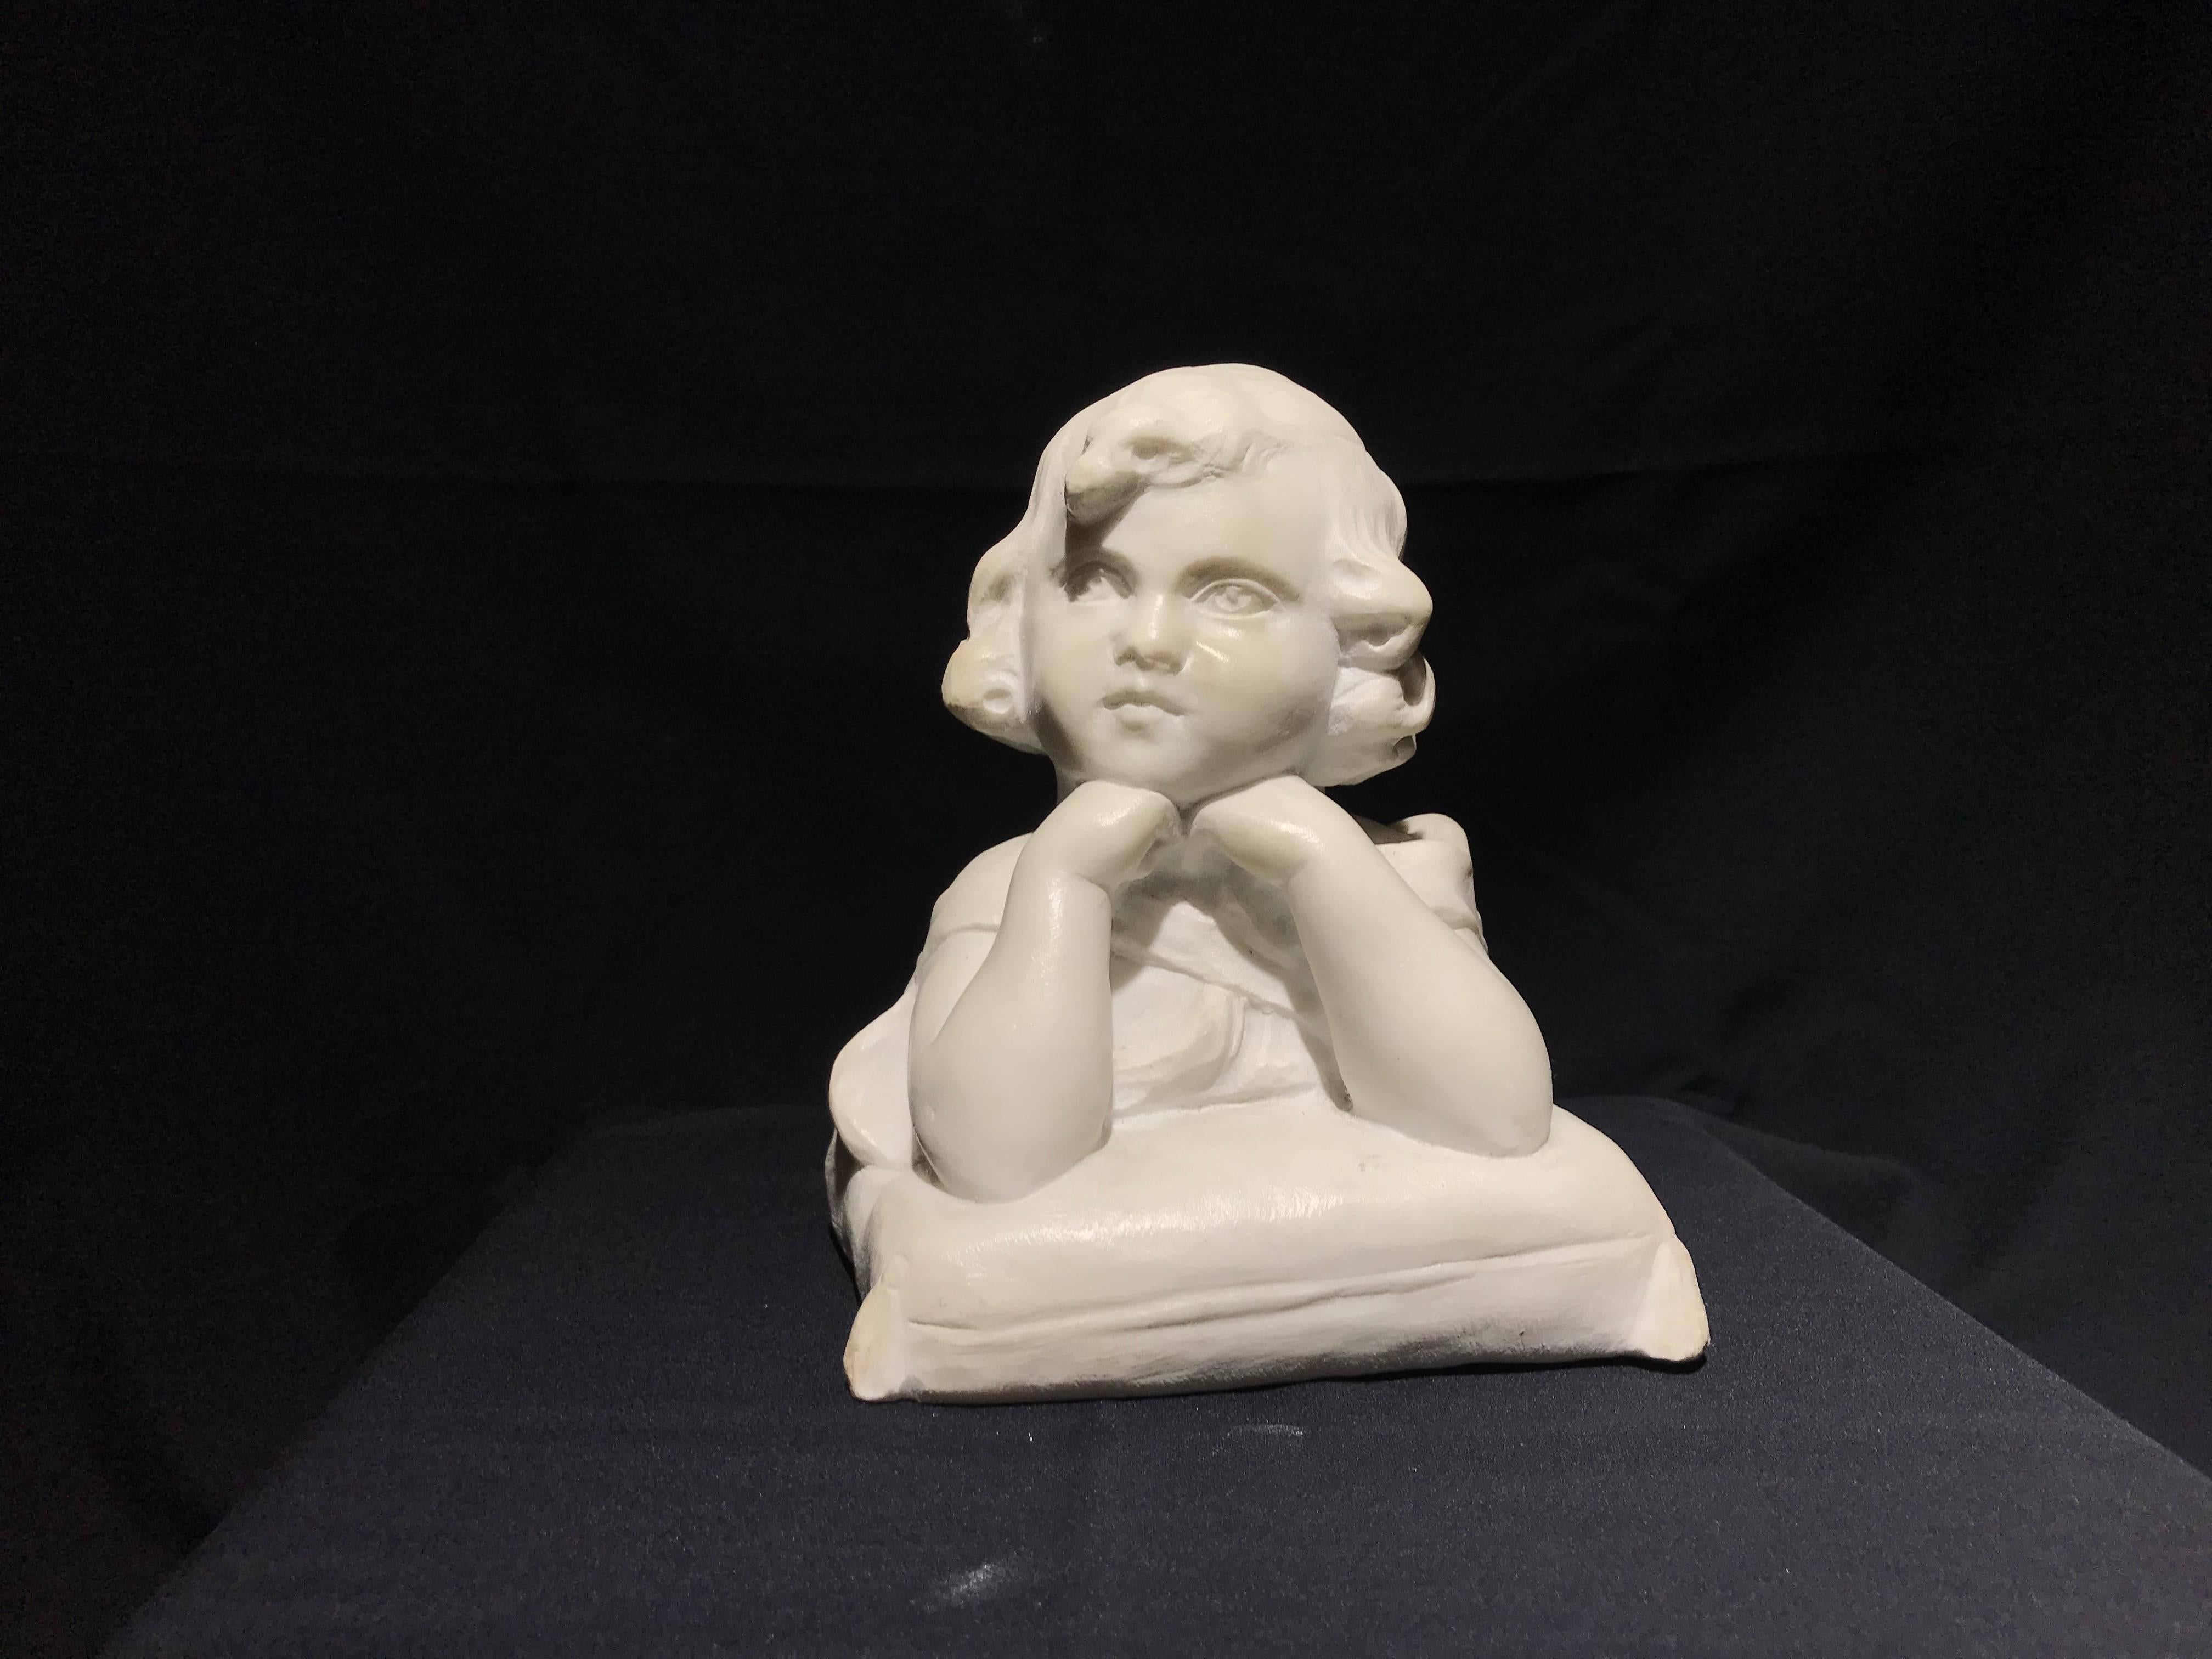 A very beautiful and classical theme of sculpture, an young angel portrayed when is thinking with his chin on his hands. It is an allegorical scene that illustrated the thought, and its importance and its statement of mind that is suspended between